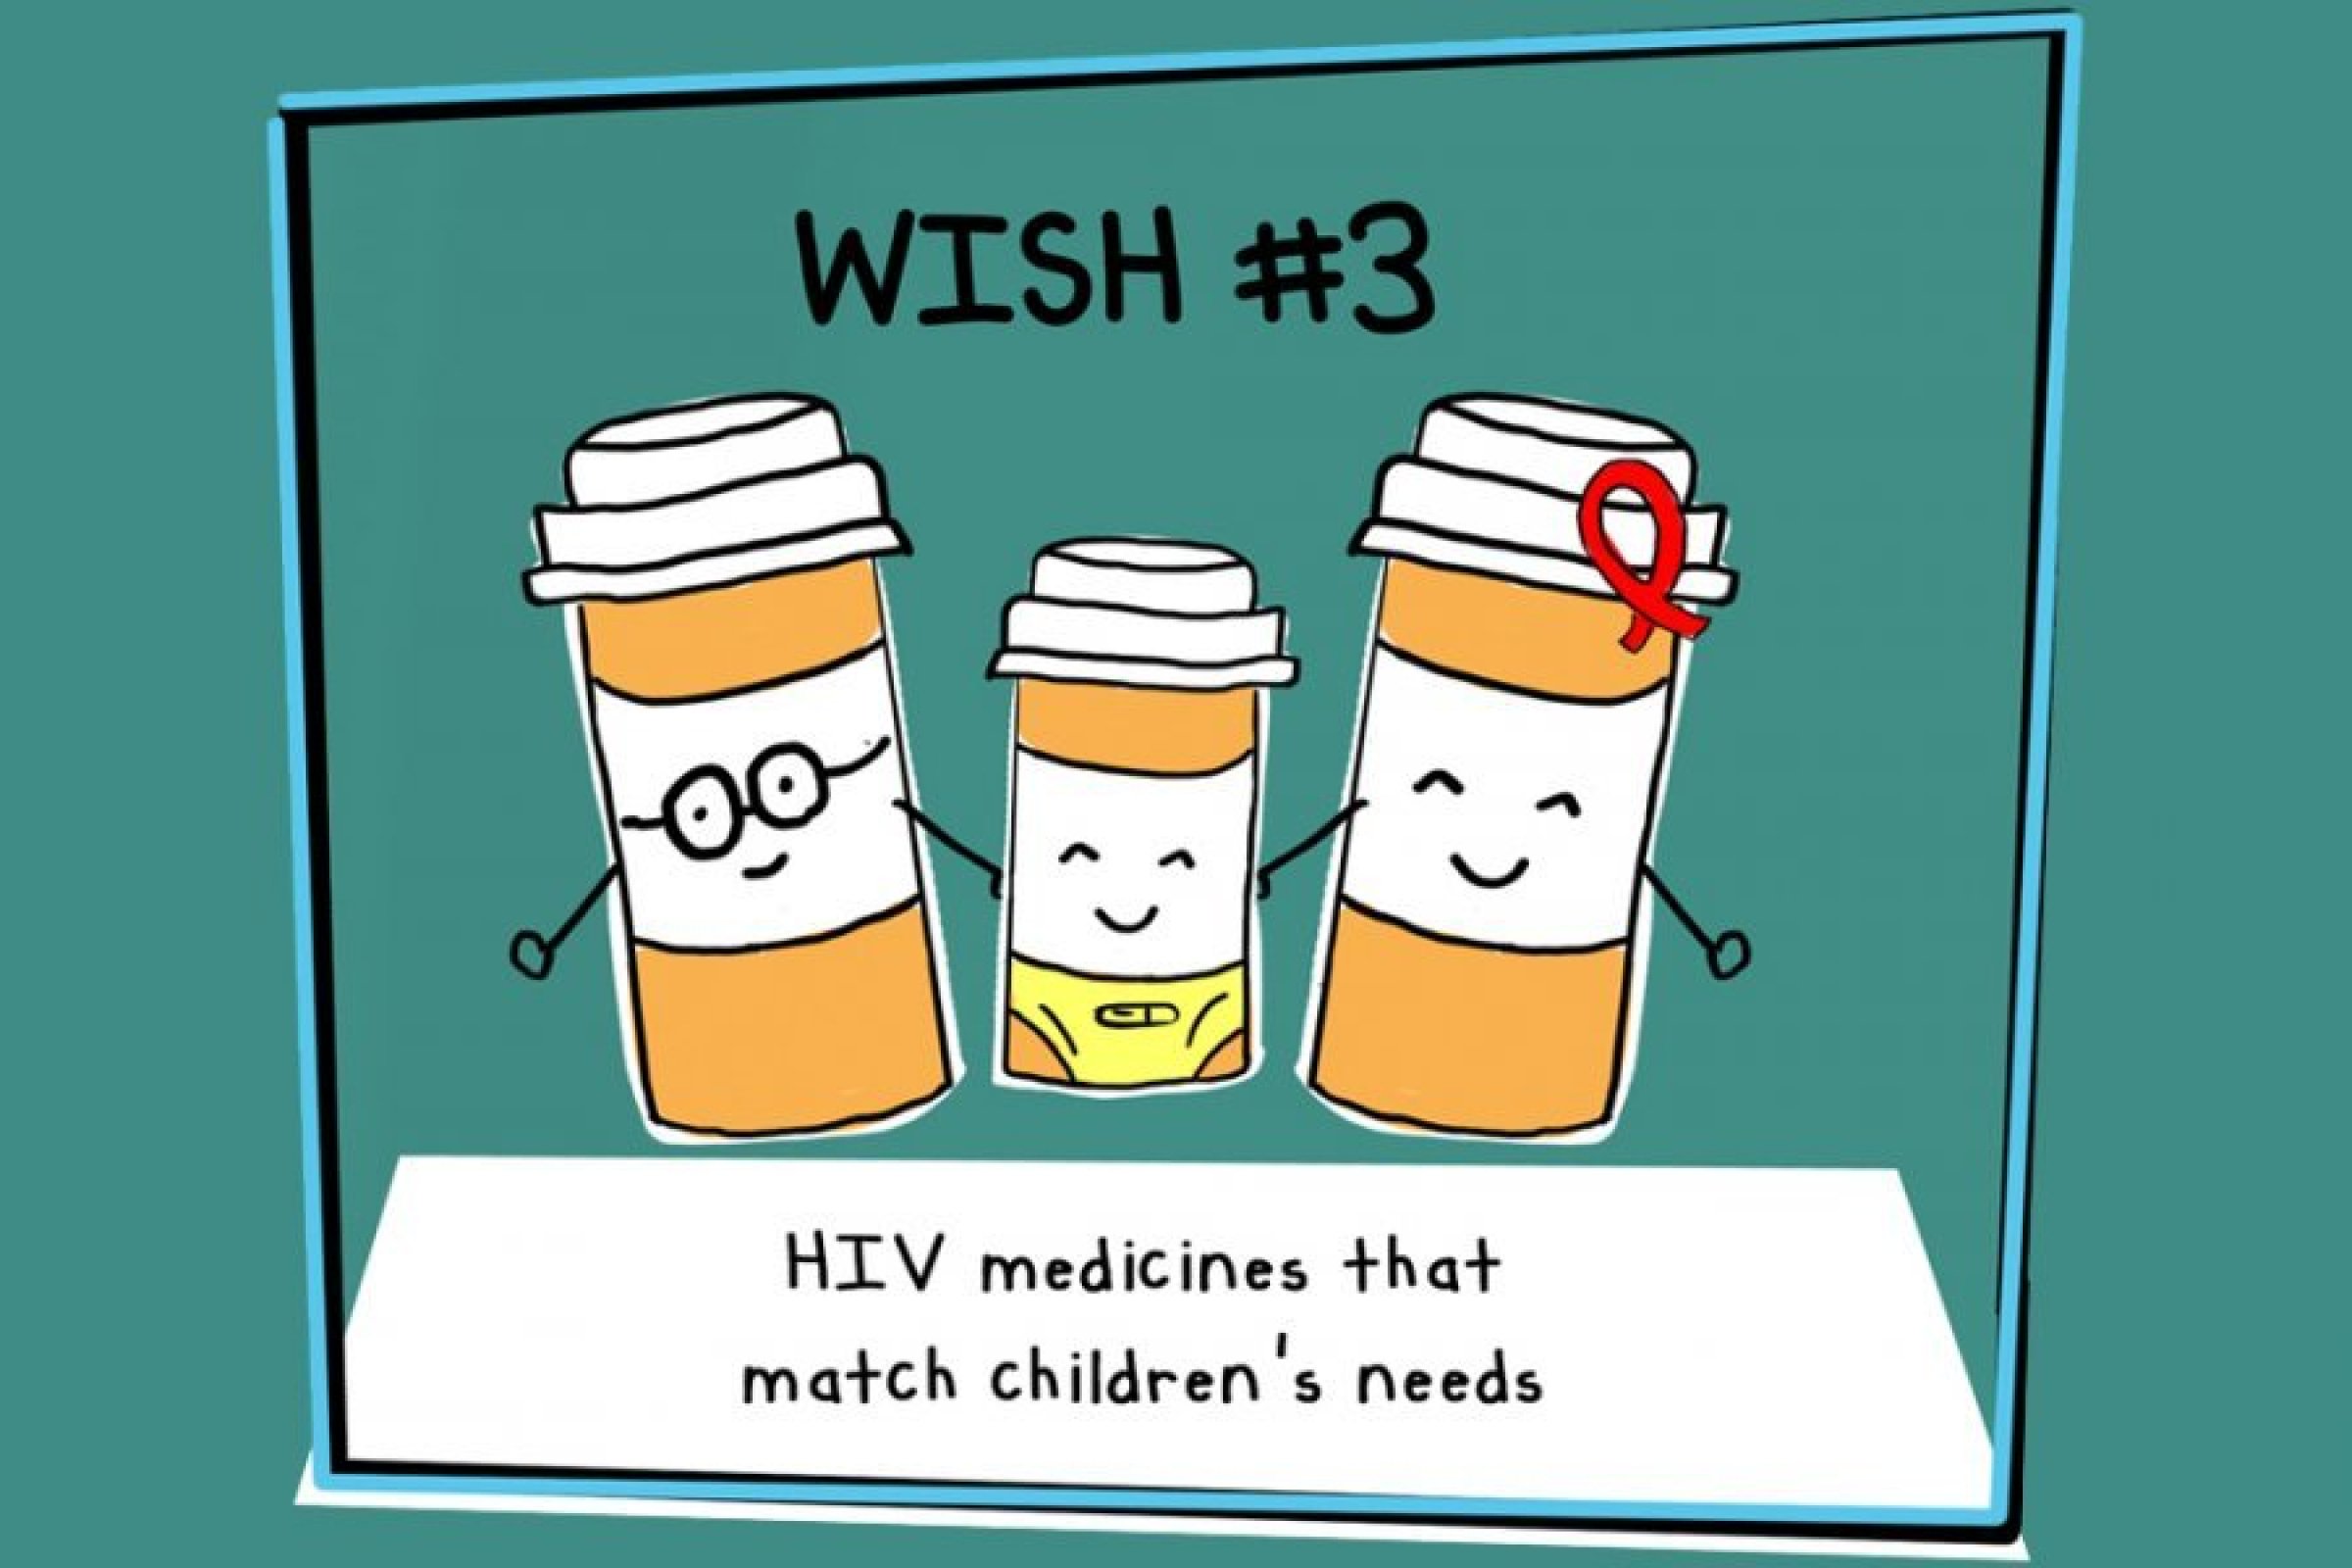 In 2020, we are calling for HIV medicines that match children's needs